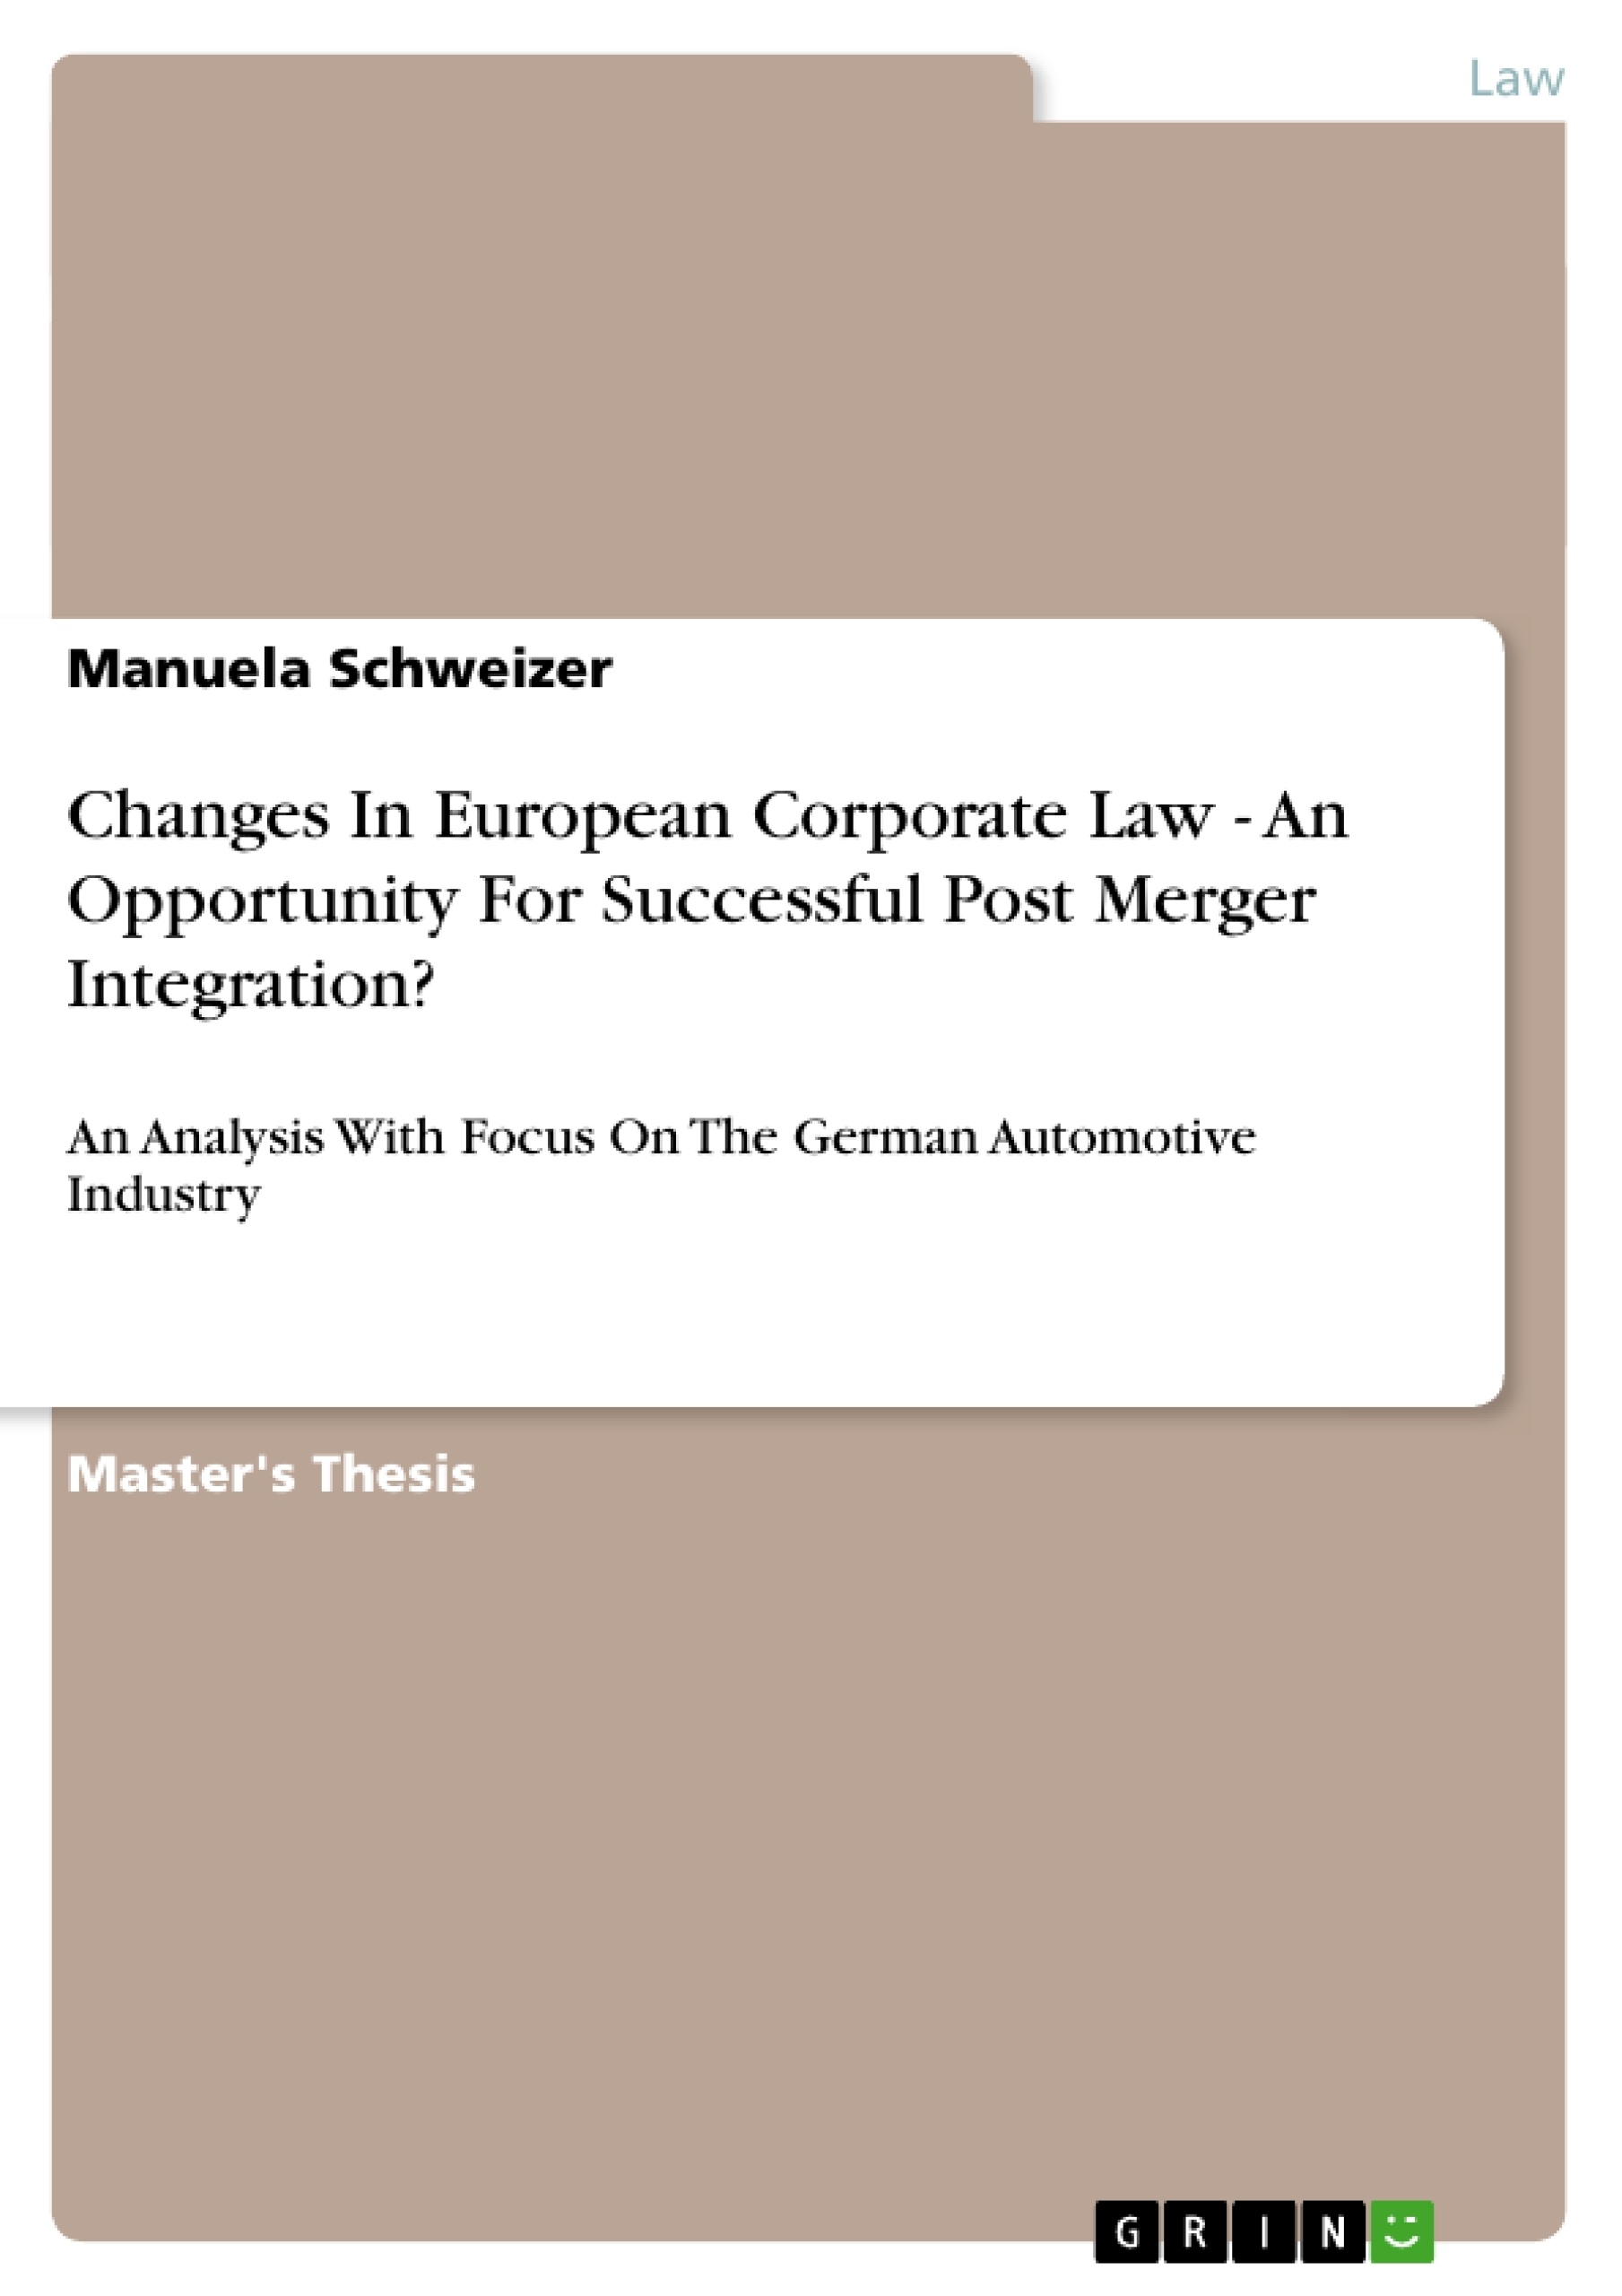 Title: Changes In European Corporate Law - An Opportunity For Successful Post Merger Integration?